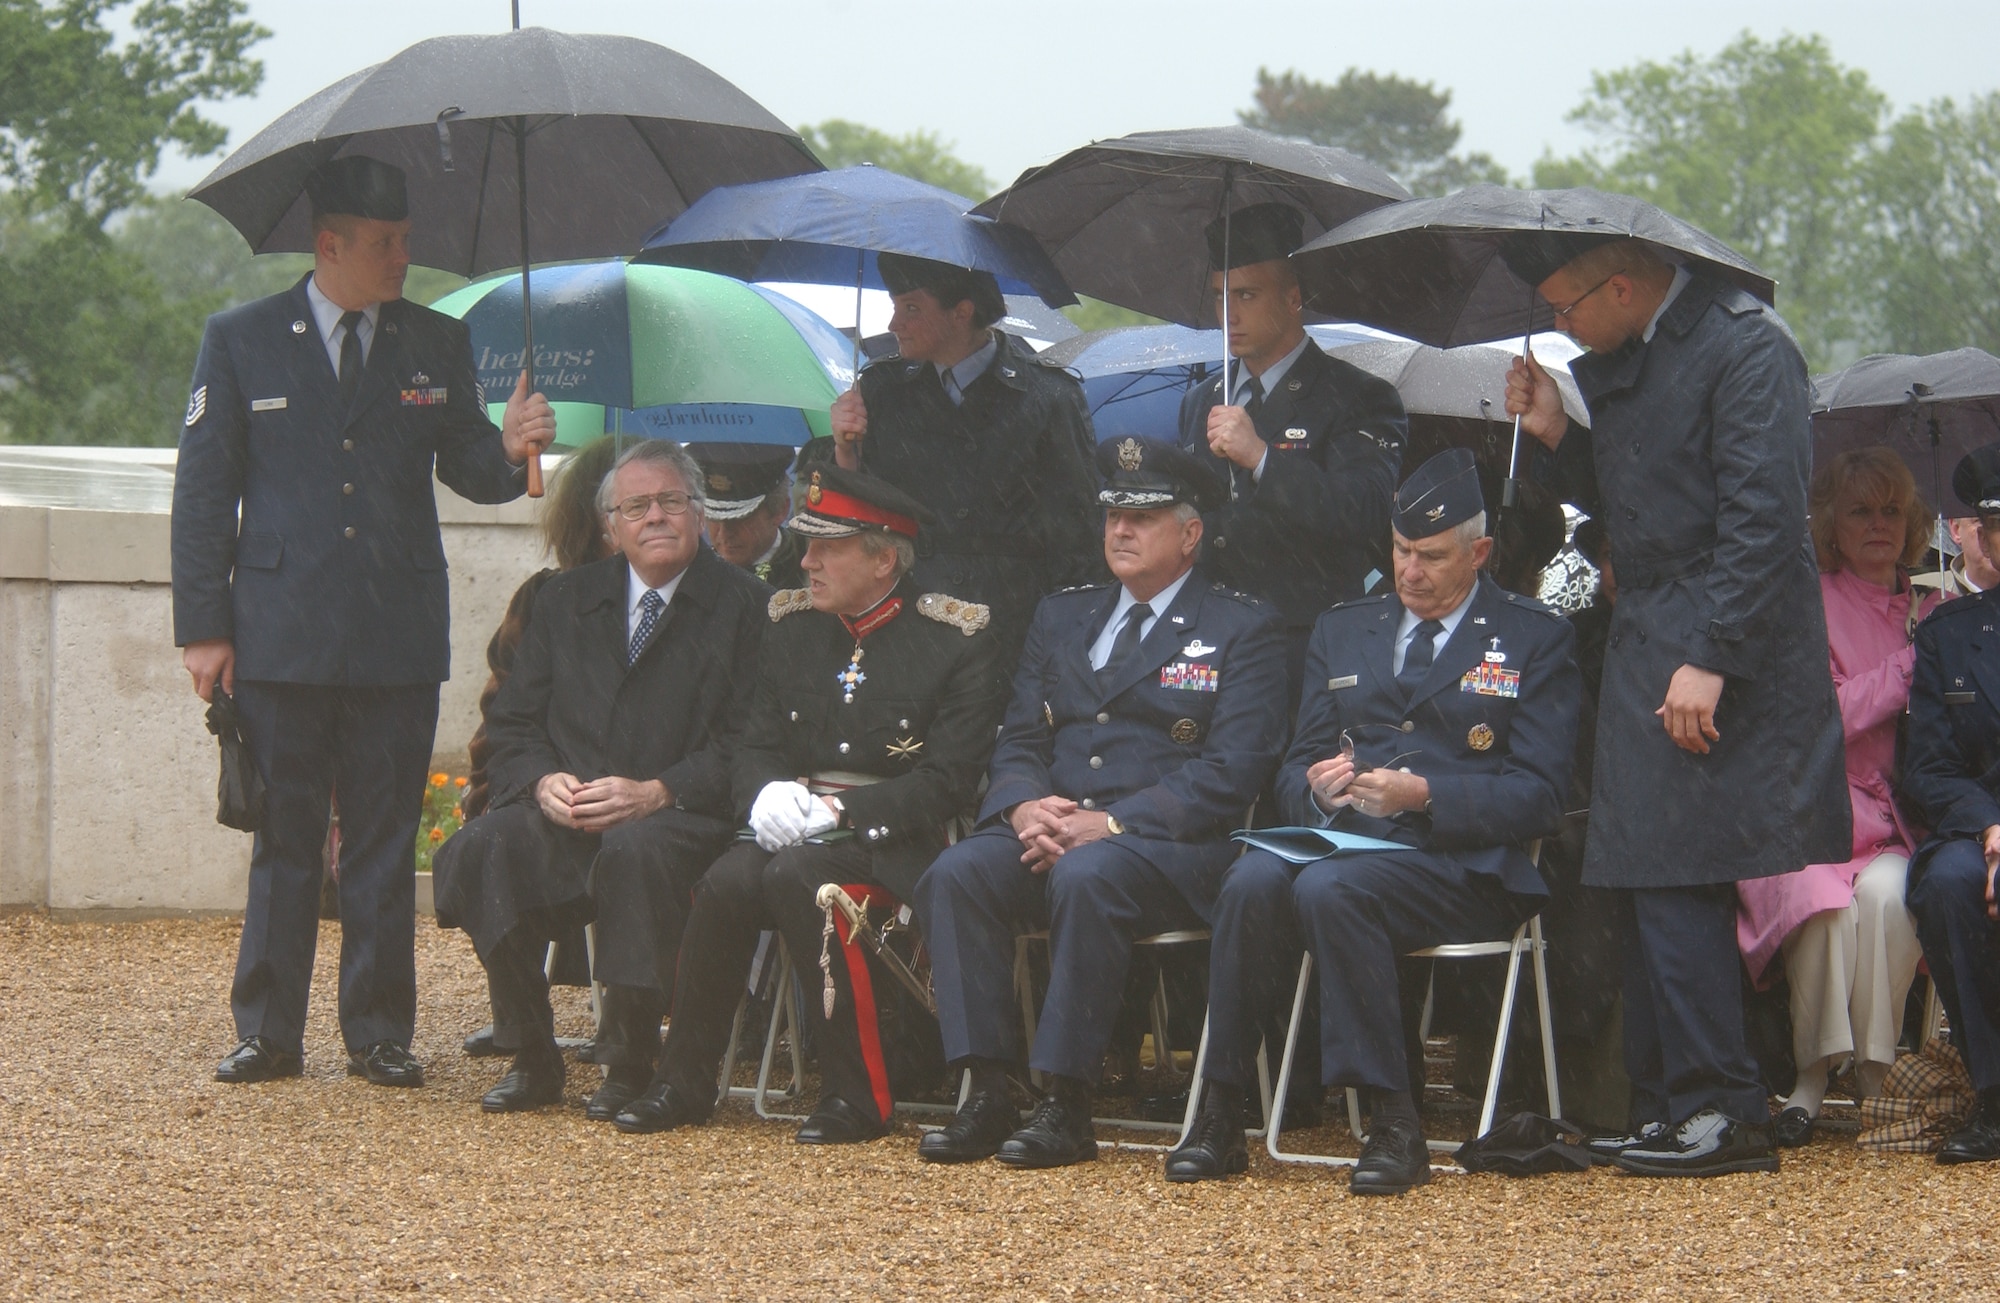 This year's distinguished guest list for the annual Memorial Day ceremony held at the Madingley World War II American Cemetery included U.S. Ambassador Robert H. Tuttle from London, Her Majesty's Lord Lieutenant Hugh Duberly of Cambridgeshire, Maj. Gen. Paul Fletcher, 3rd Air Force commander and U.S. Air Forces in Europe Command Chaplain Col. Carl Andrews, May 28, 2007. (Air Force photo by Tech. Sgt. Tracy L. DeMarco)